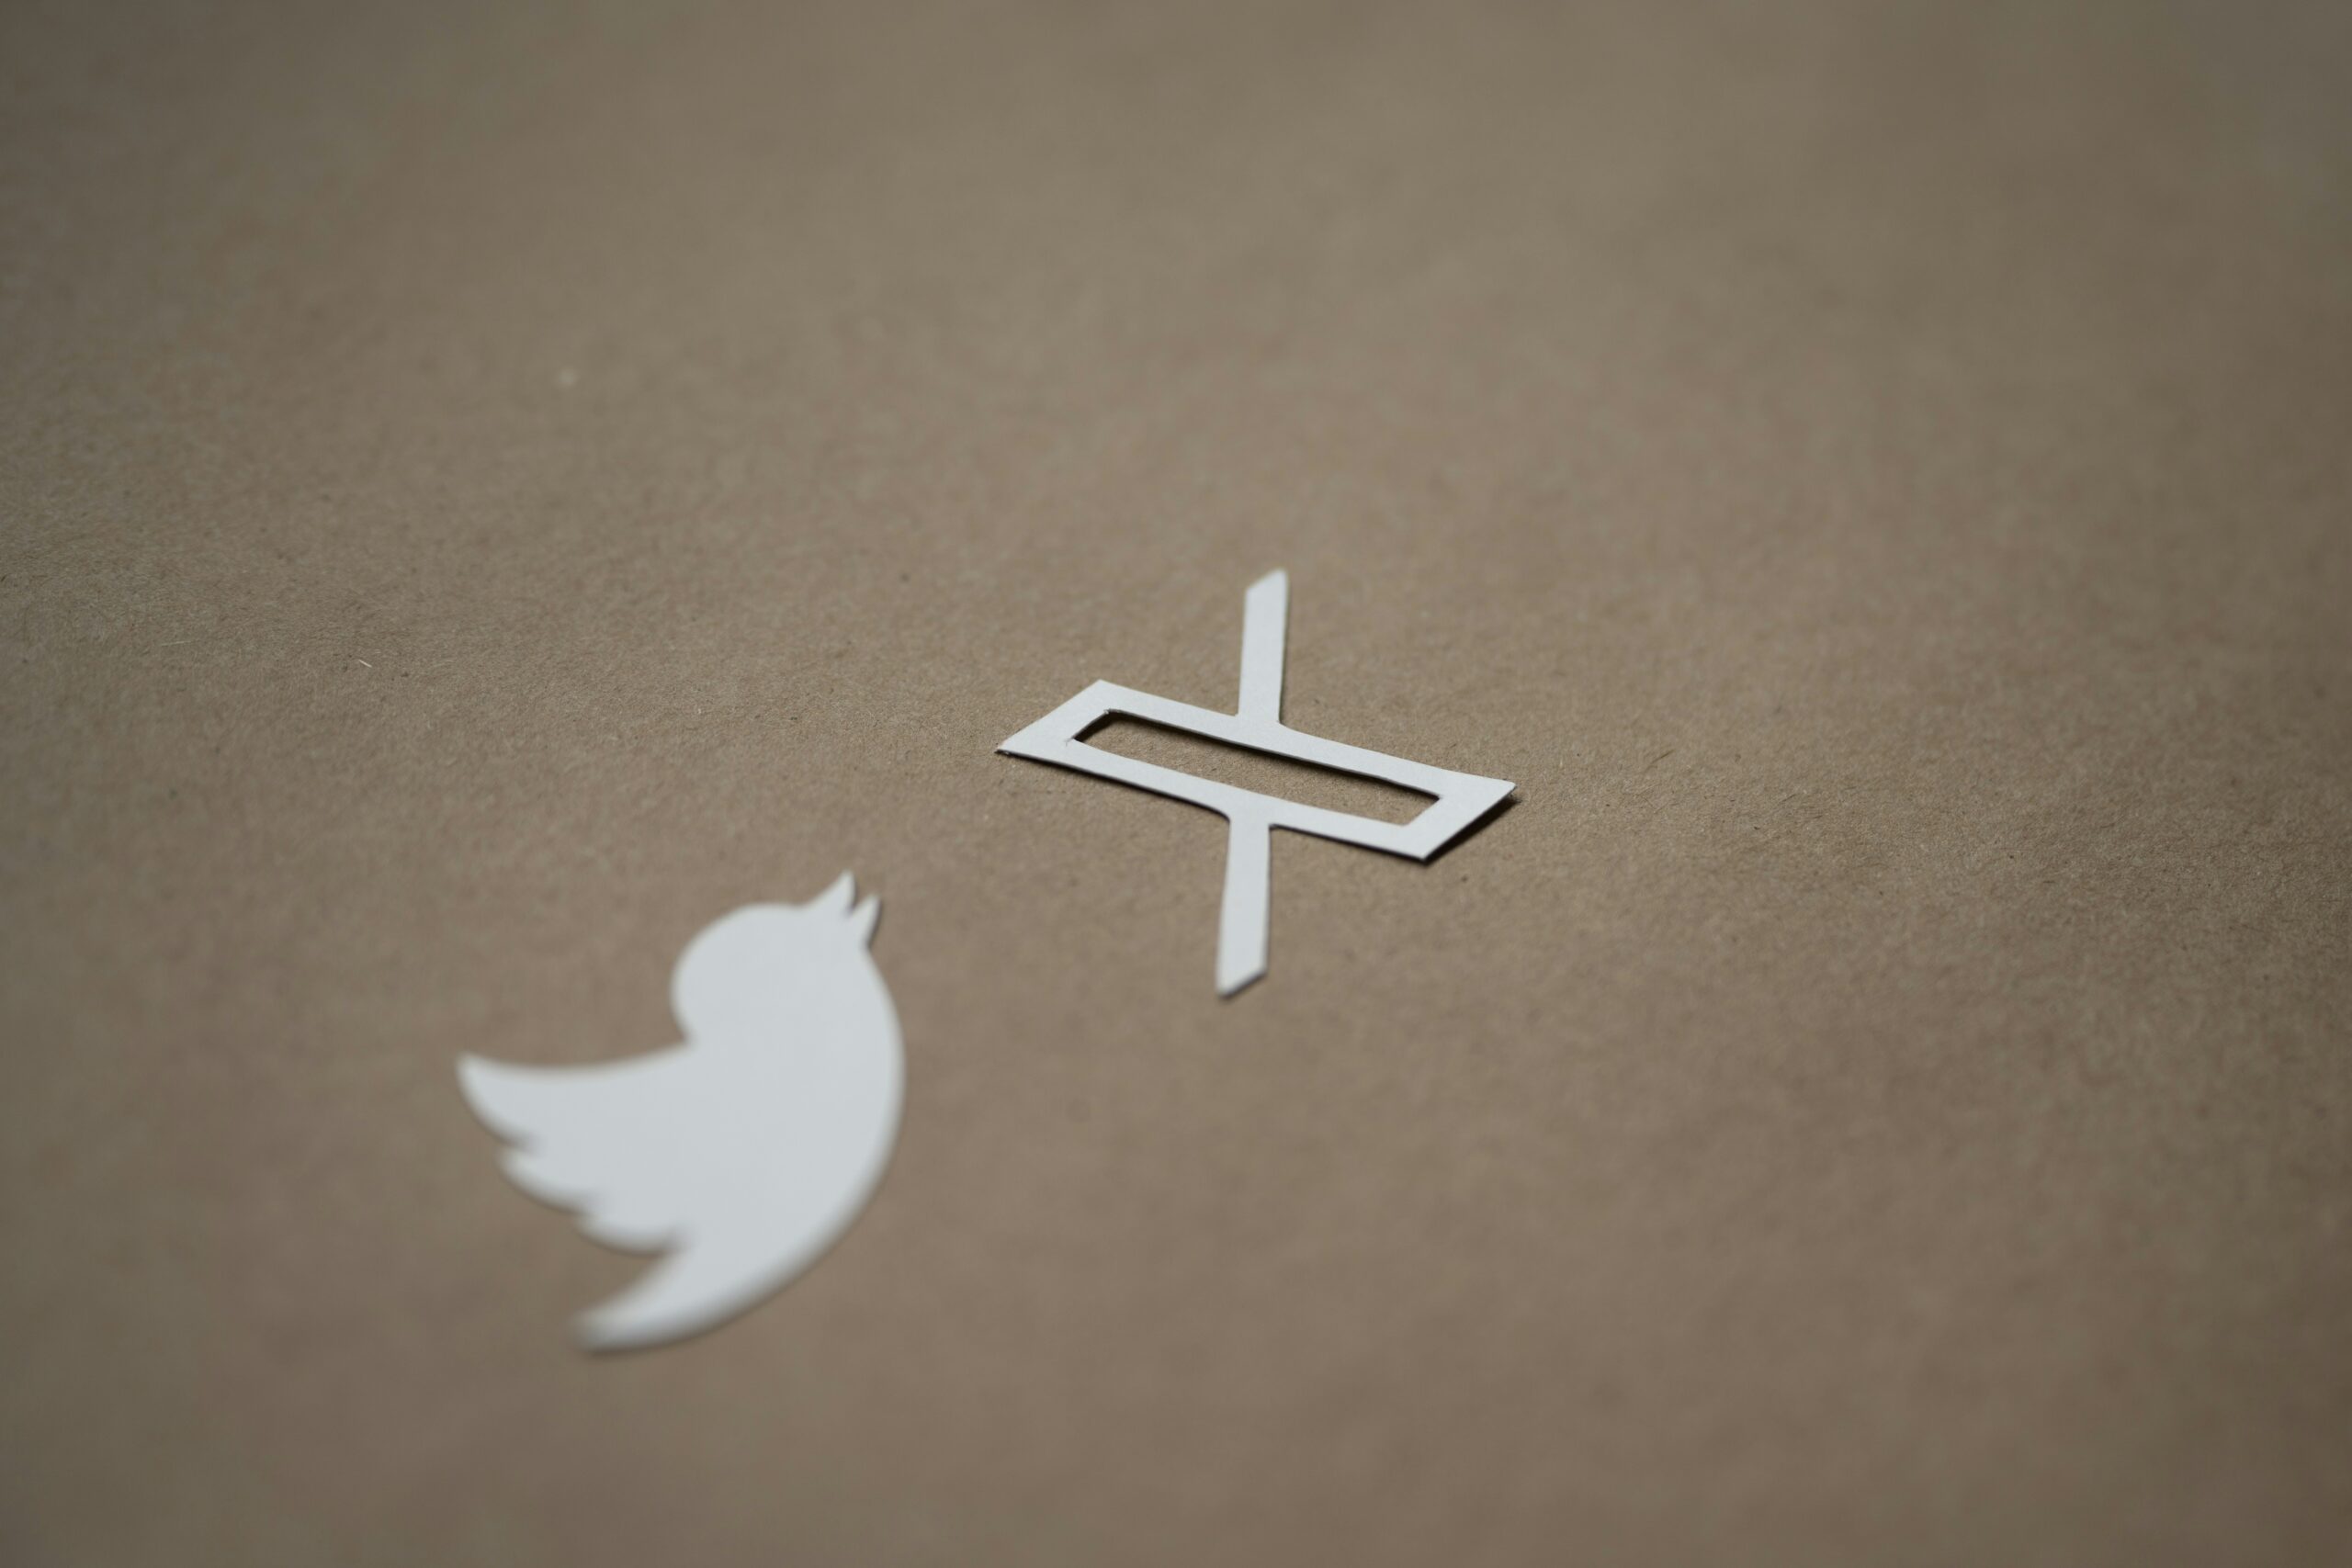 the white logo for ex and the former logo for twitter appear on a brown, wood background